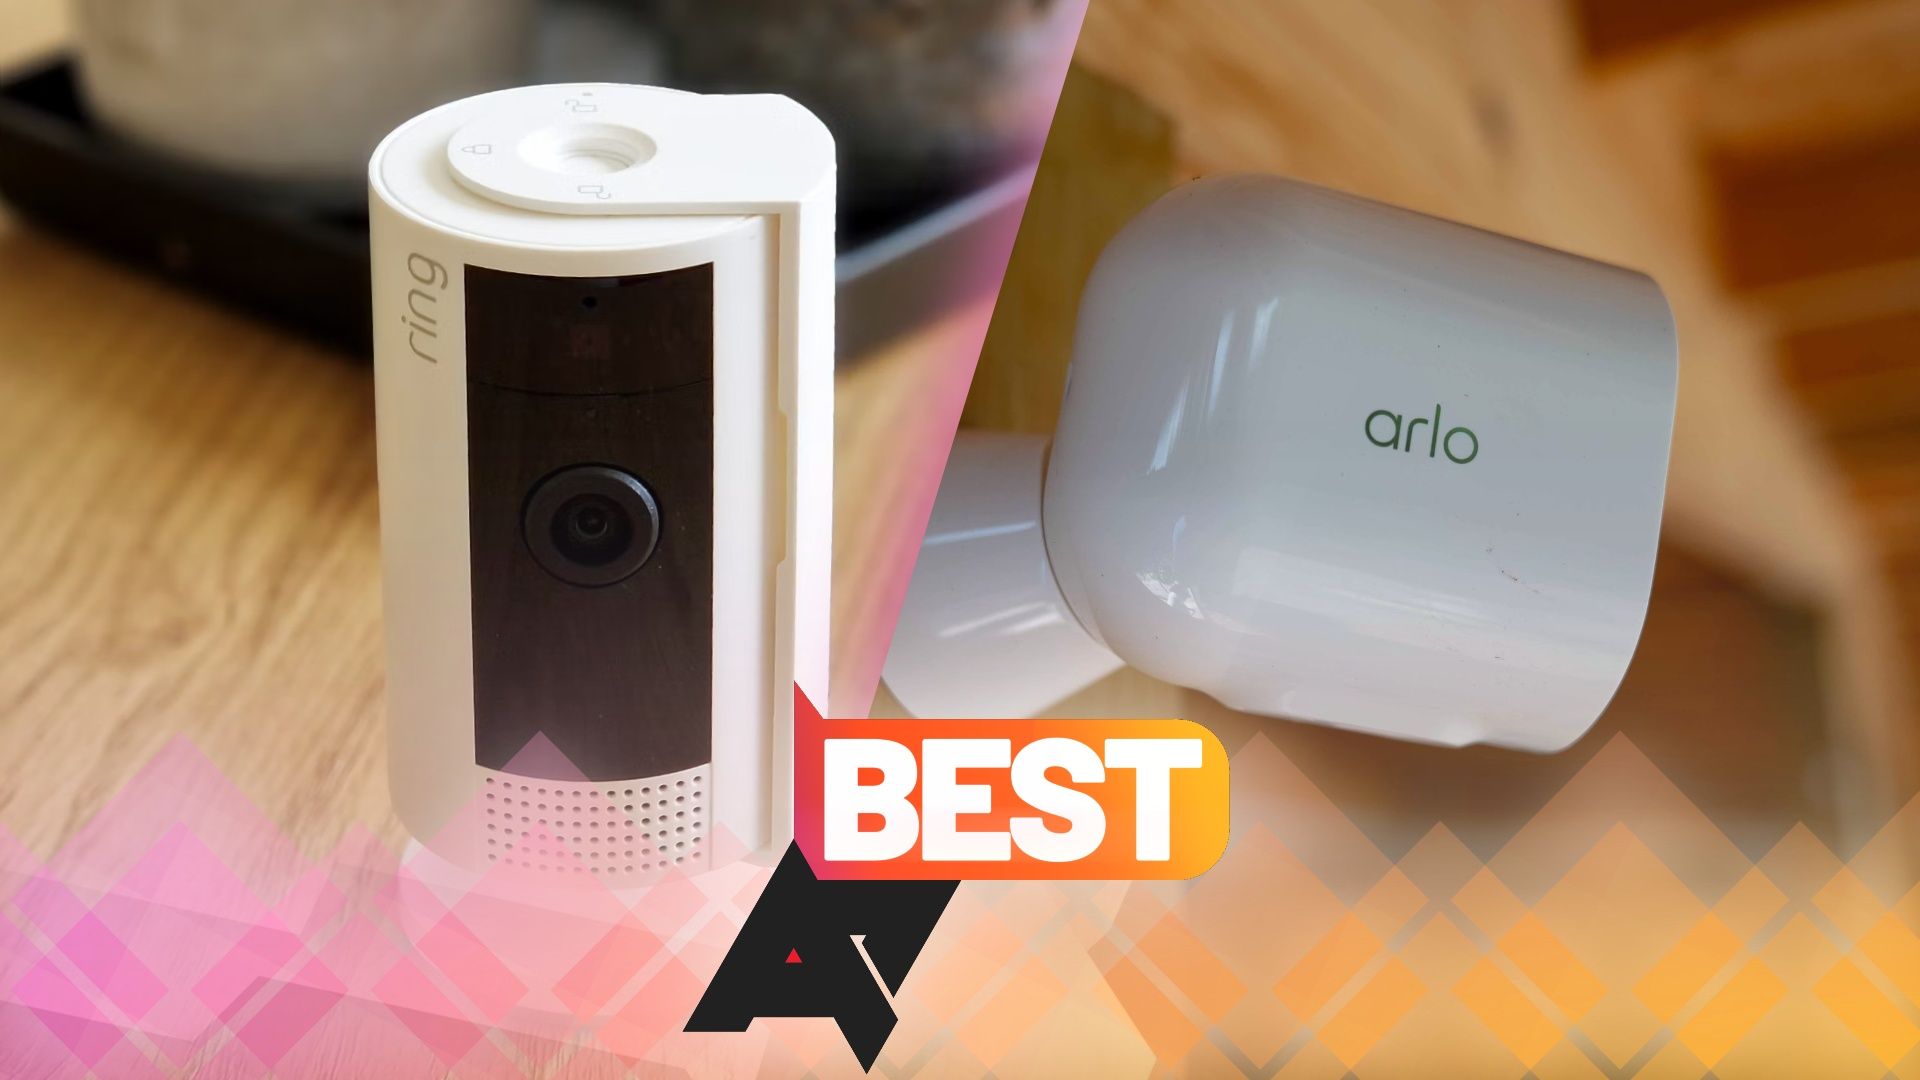 Photos of a Ring and an Arlo home security camera with an AP Best logo between them